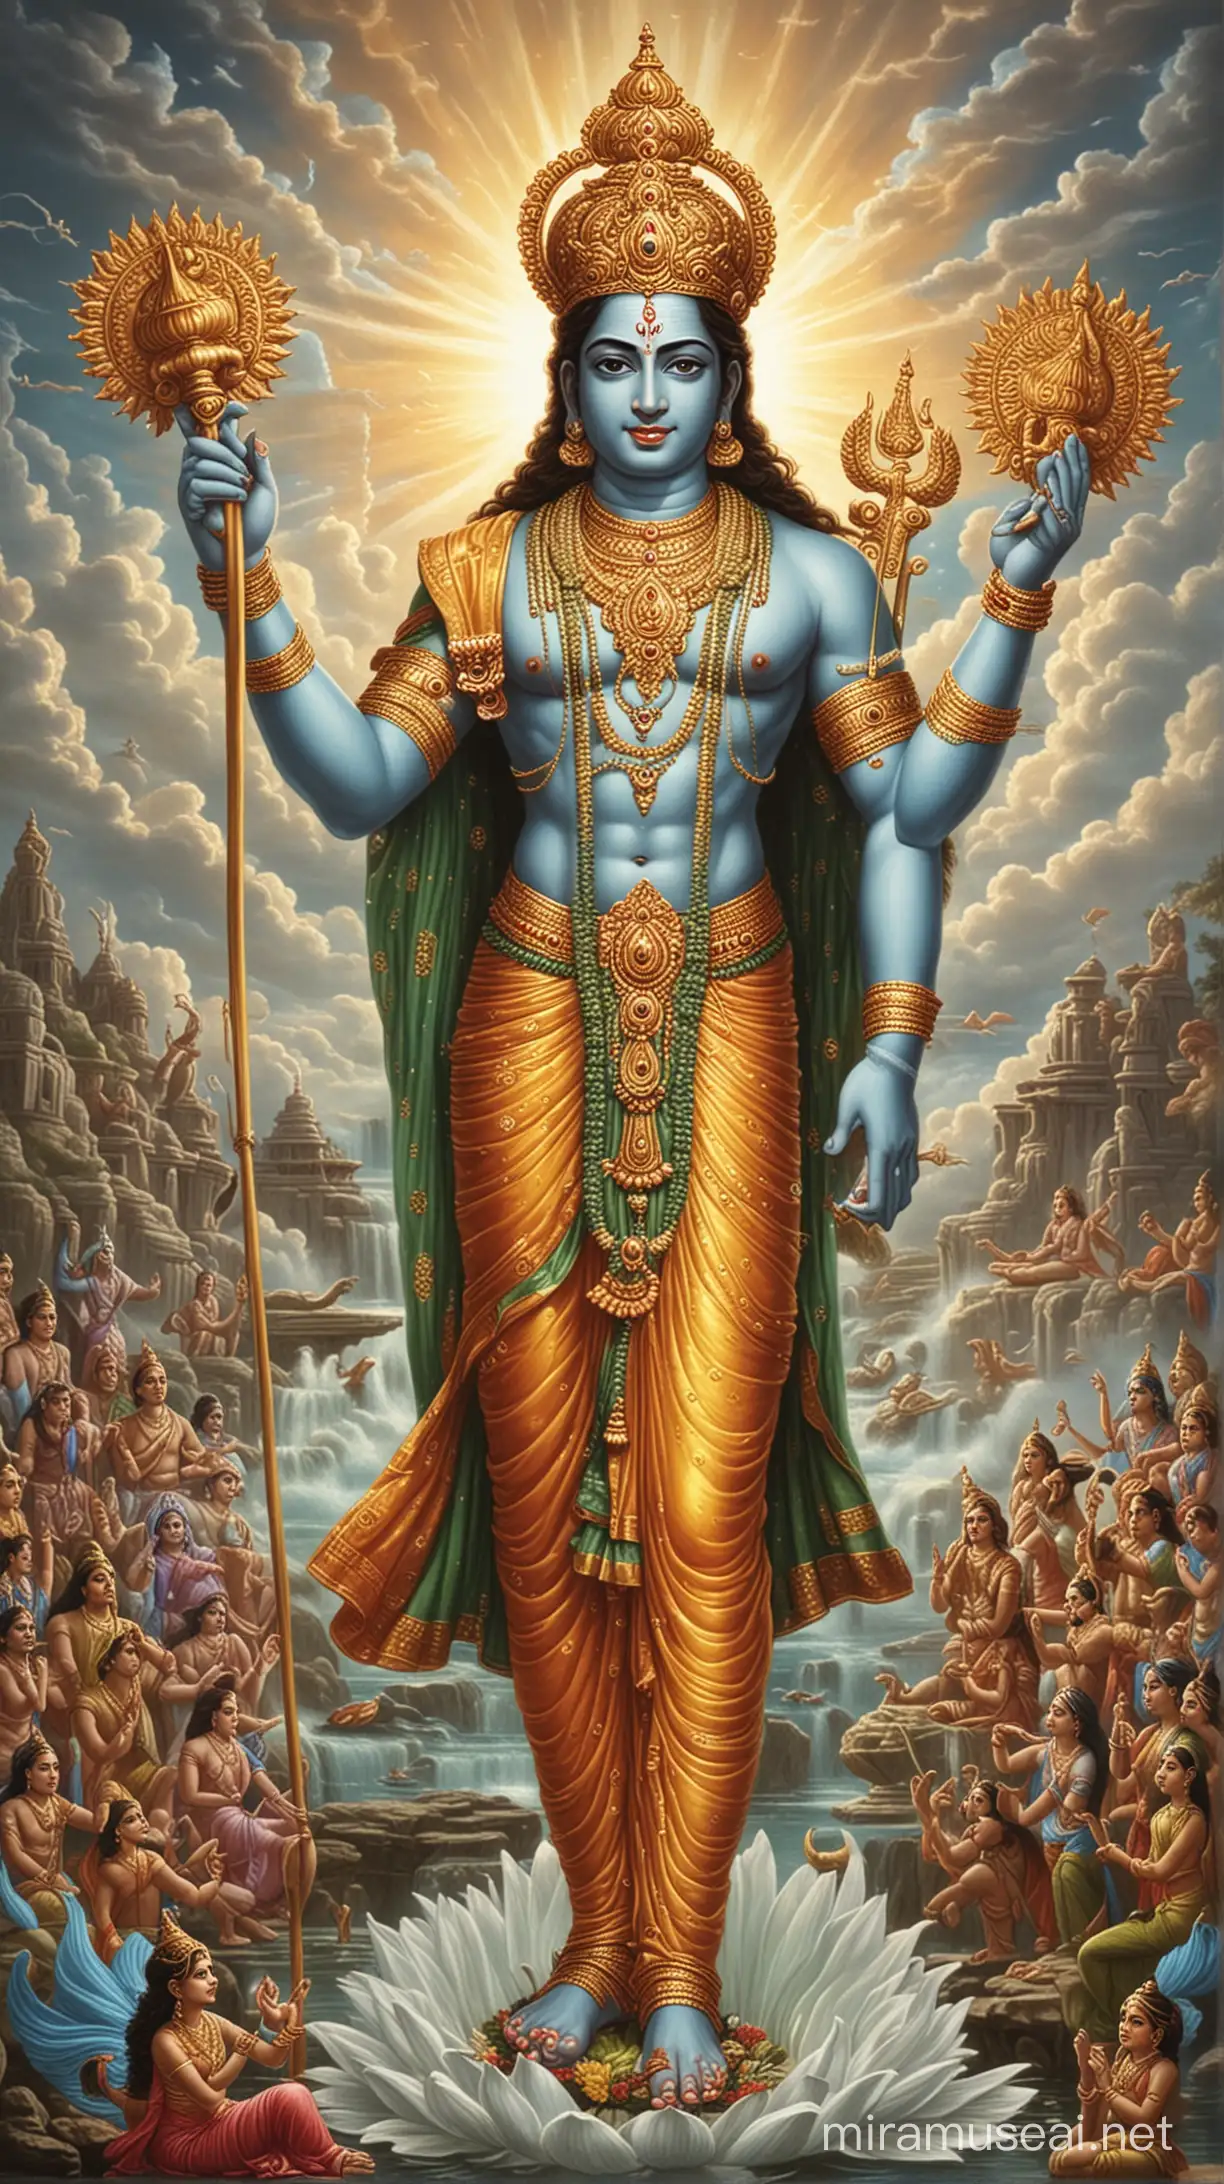 Divine Vishnu Protector and Preserver of the Universe in Traditional Indian Art